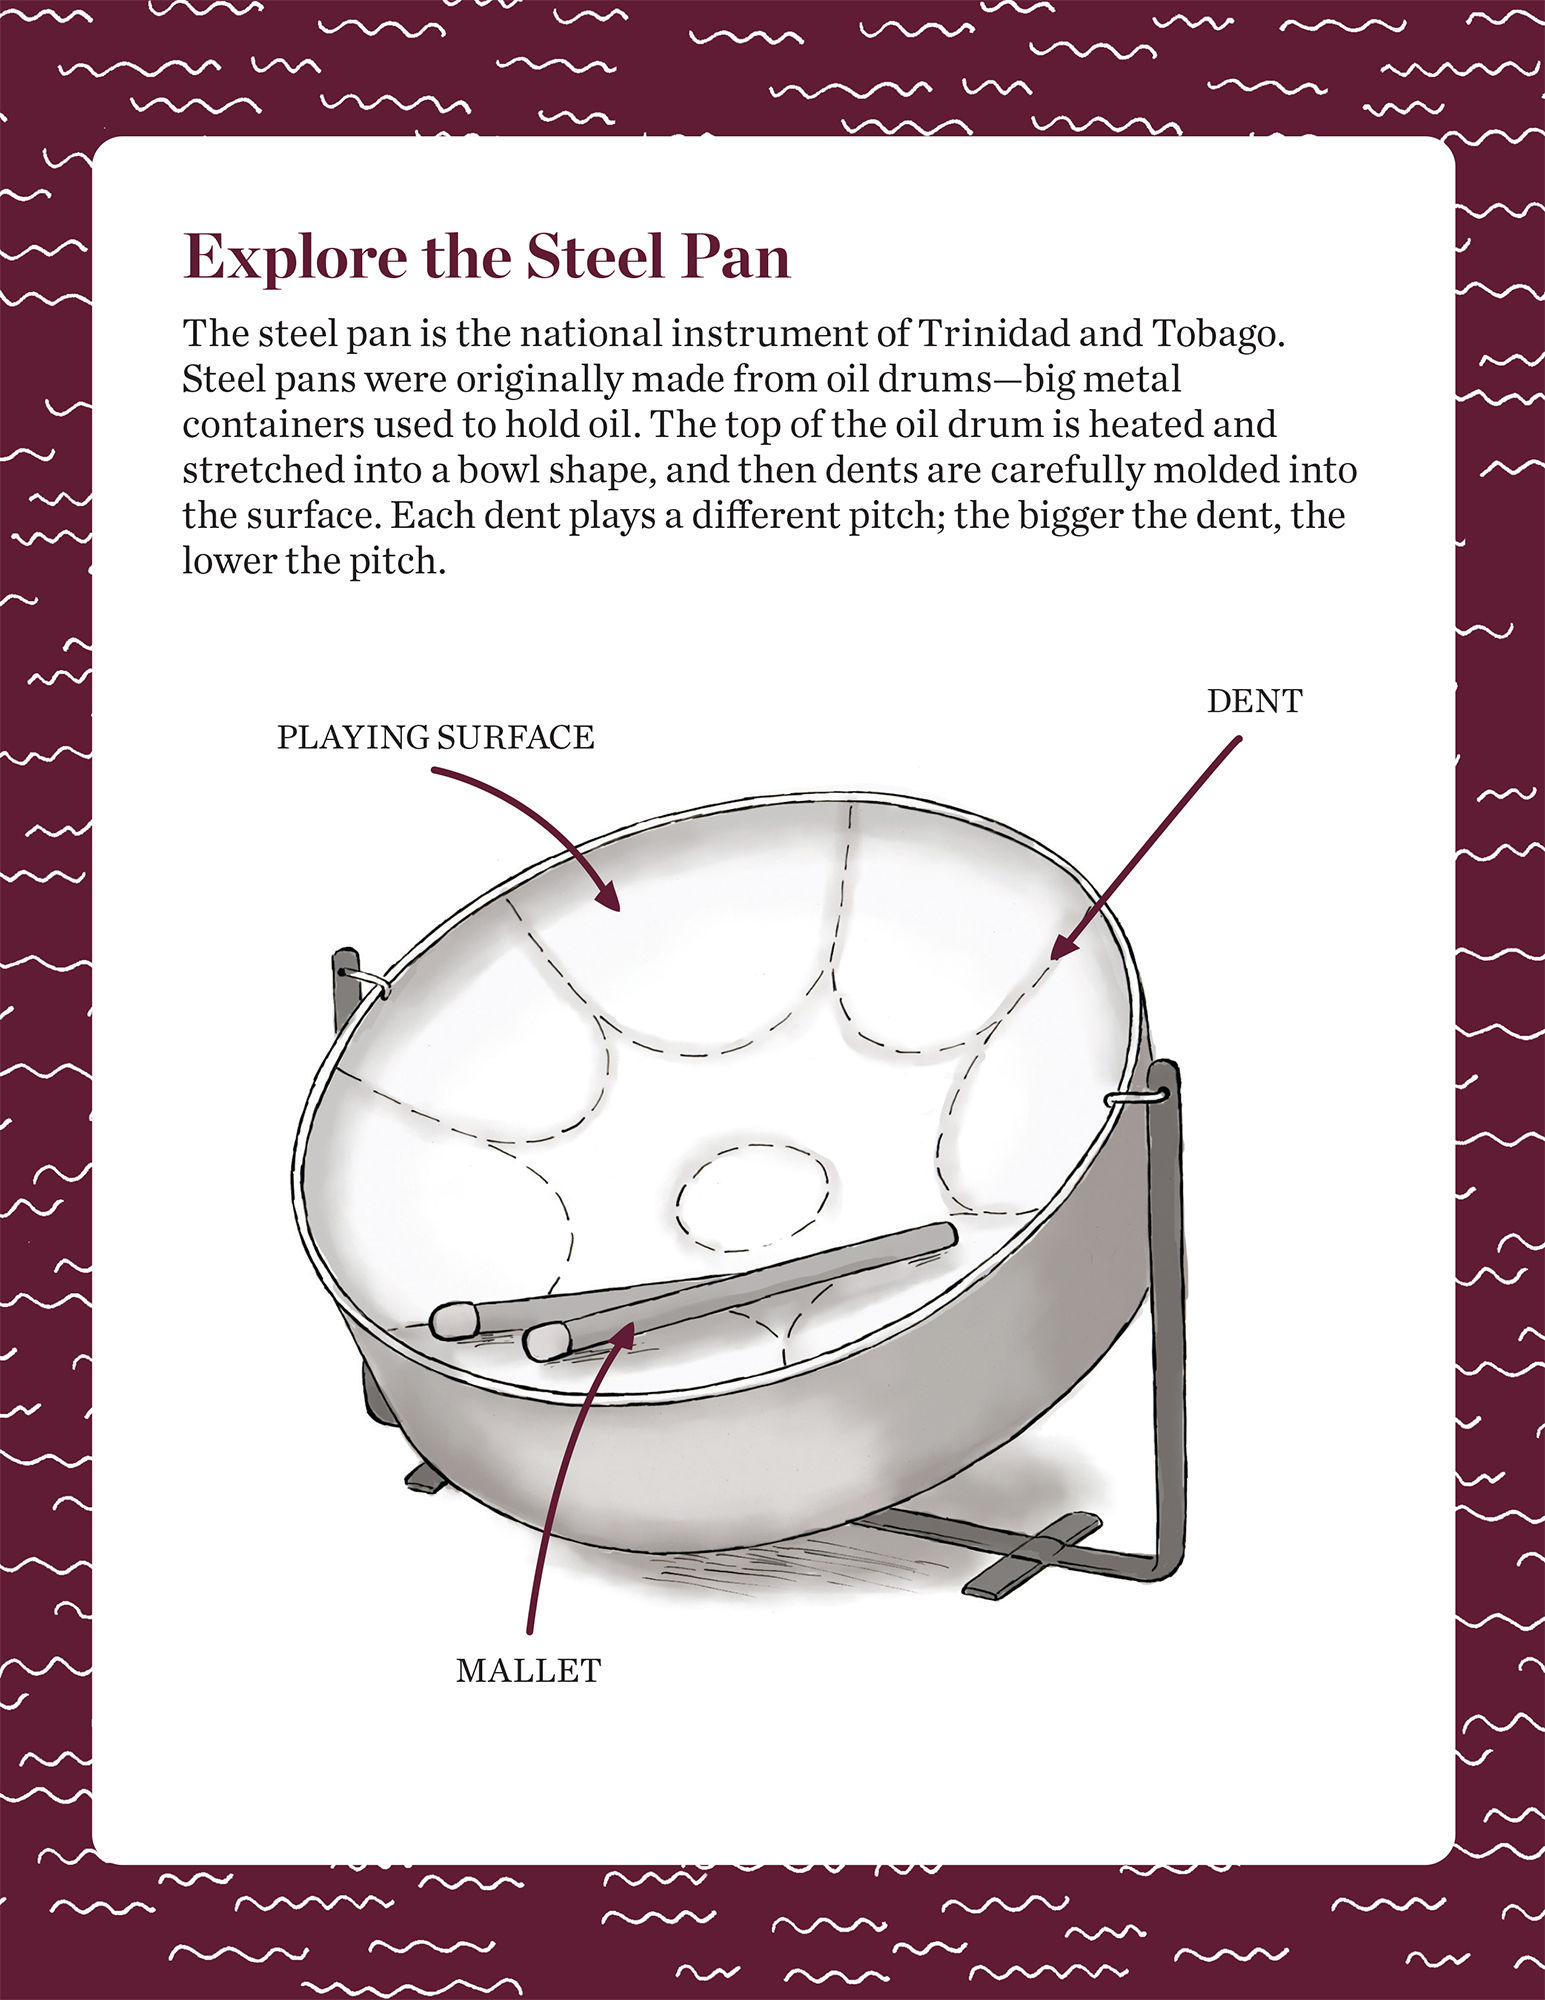 "Explore the Steel Pan" student activity depicting an illustration of a steel pan